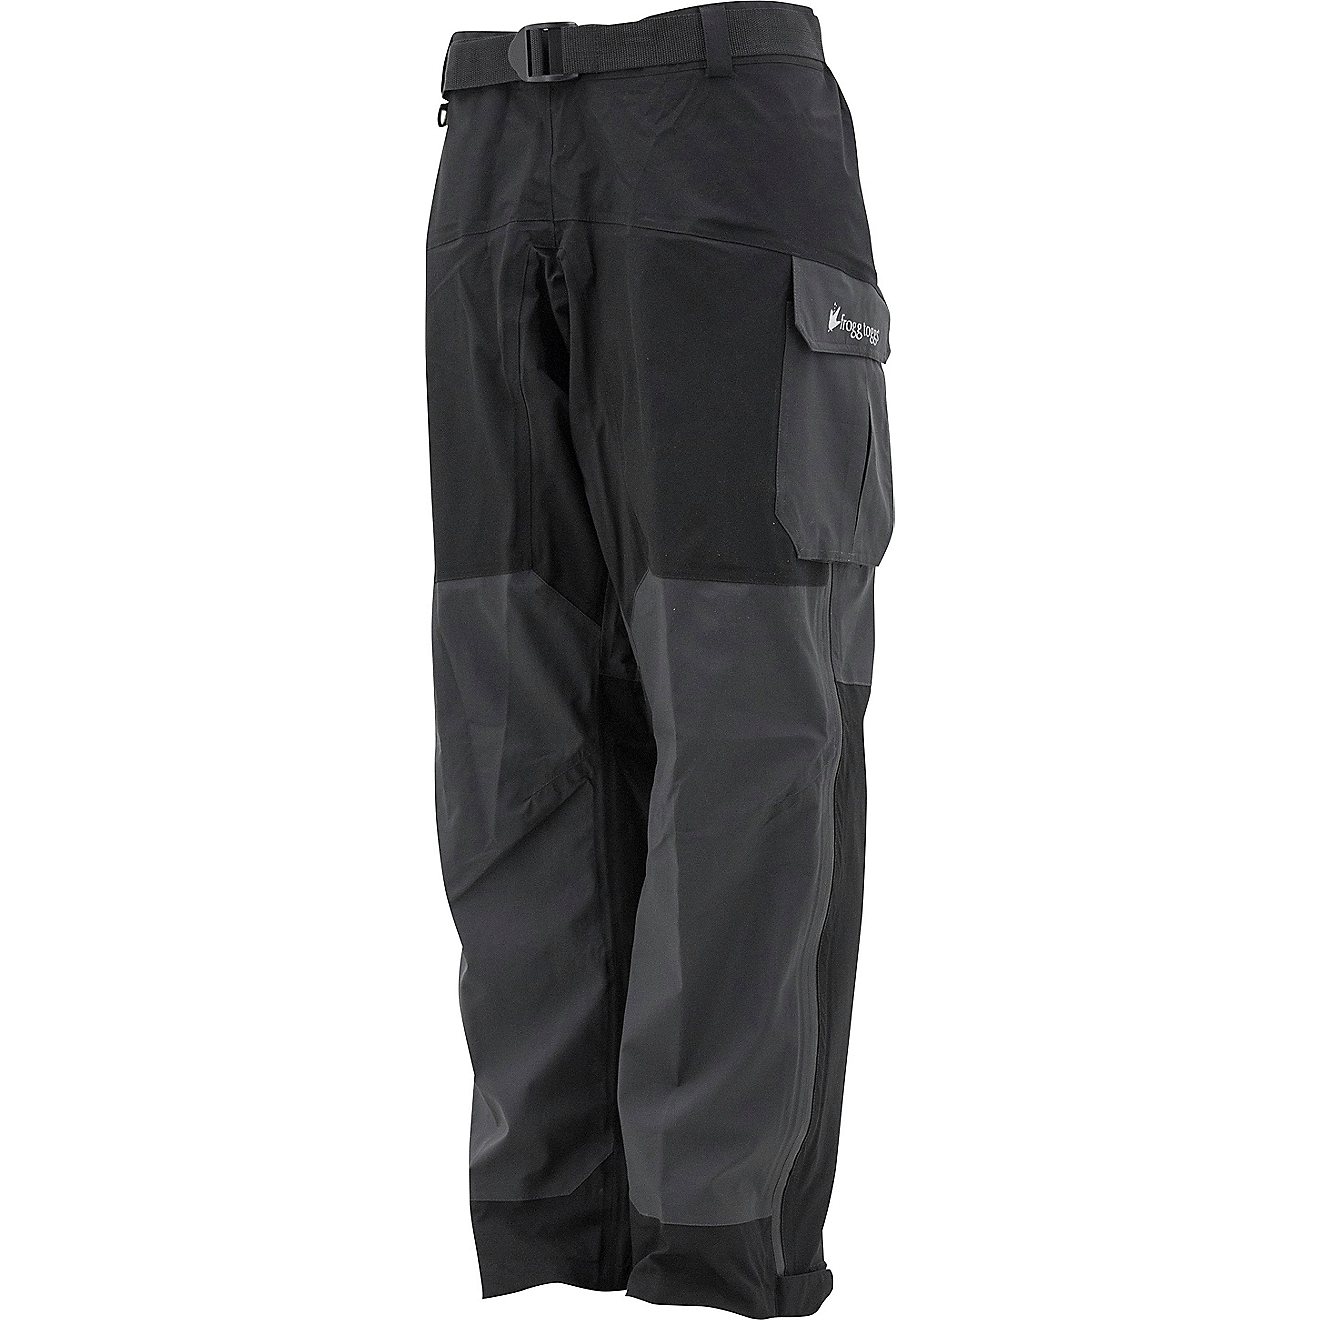 Frogg toggs Men's Pilot Guide Fishing Pants                                                                                      - view number 1